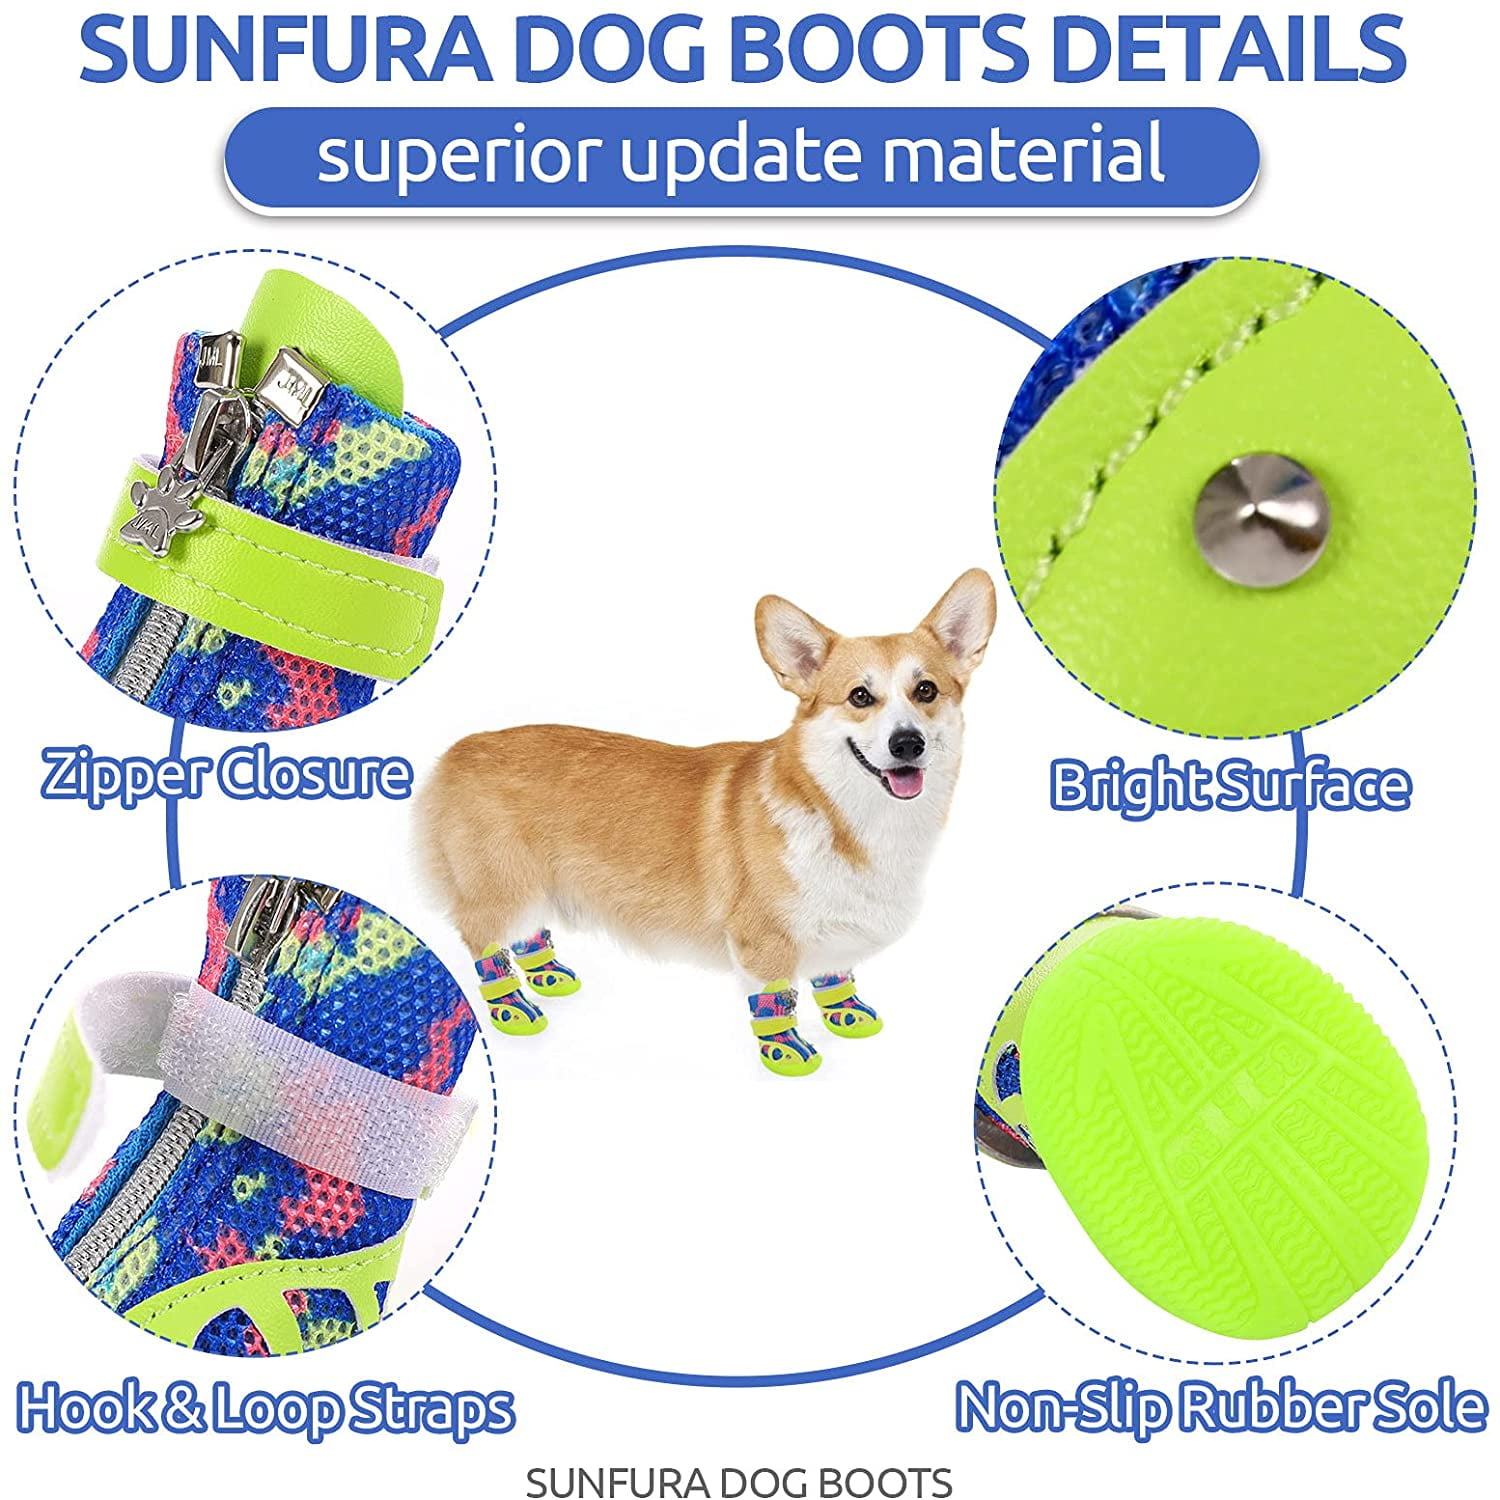 Breathable Outdoor Mesh Dog Booties with Adjustable Straps and Anti-Slip Durable Waterproof Sole Puppy Paw Protector with Zipper Closure for Small Dogs SUNFURA Camo Dog Boots Pet Shoes 